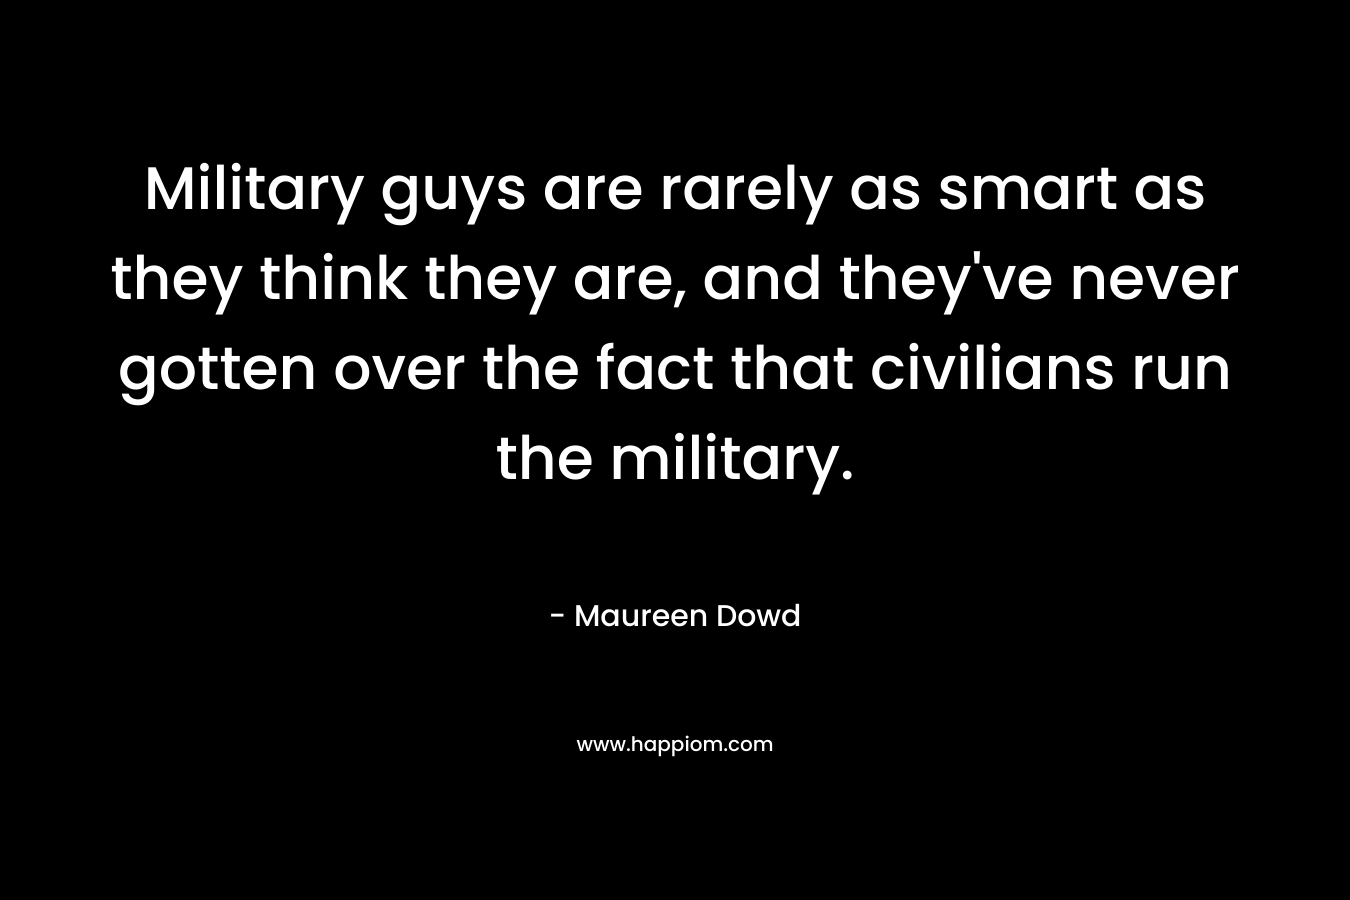 Military guys are rarely as smart as they think they are, and they've never gotten over the fact that civilians run the military.